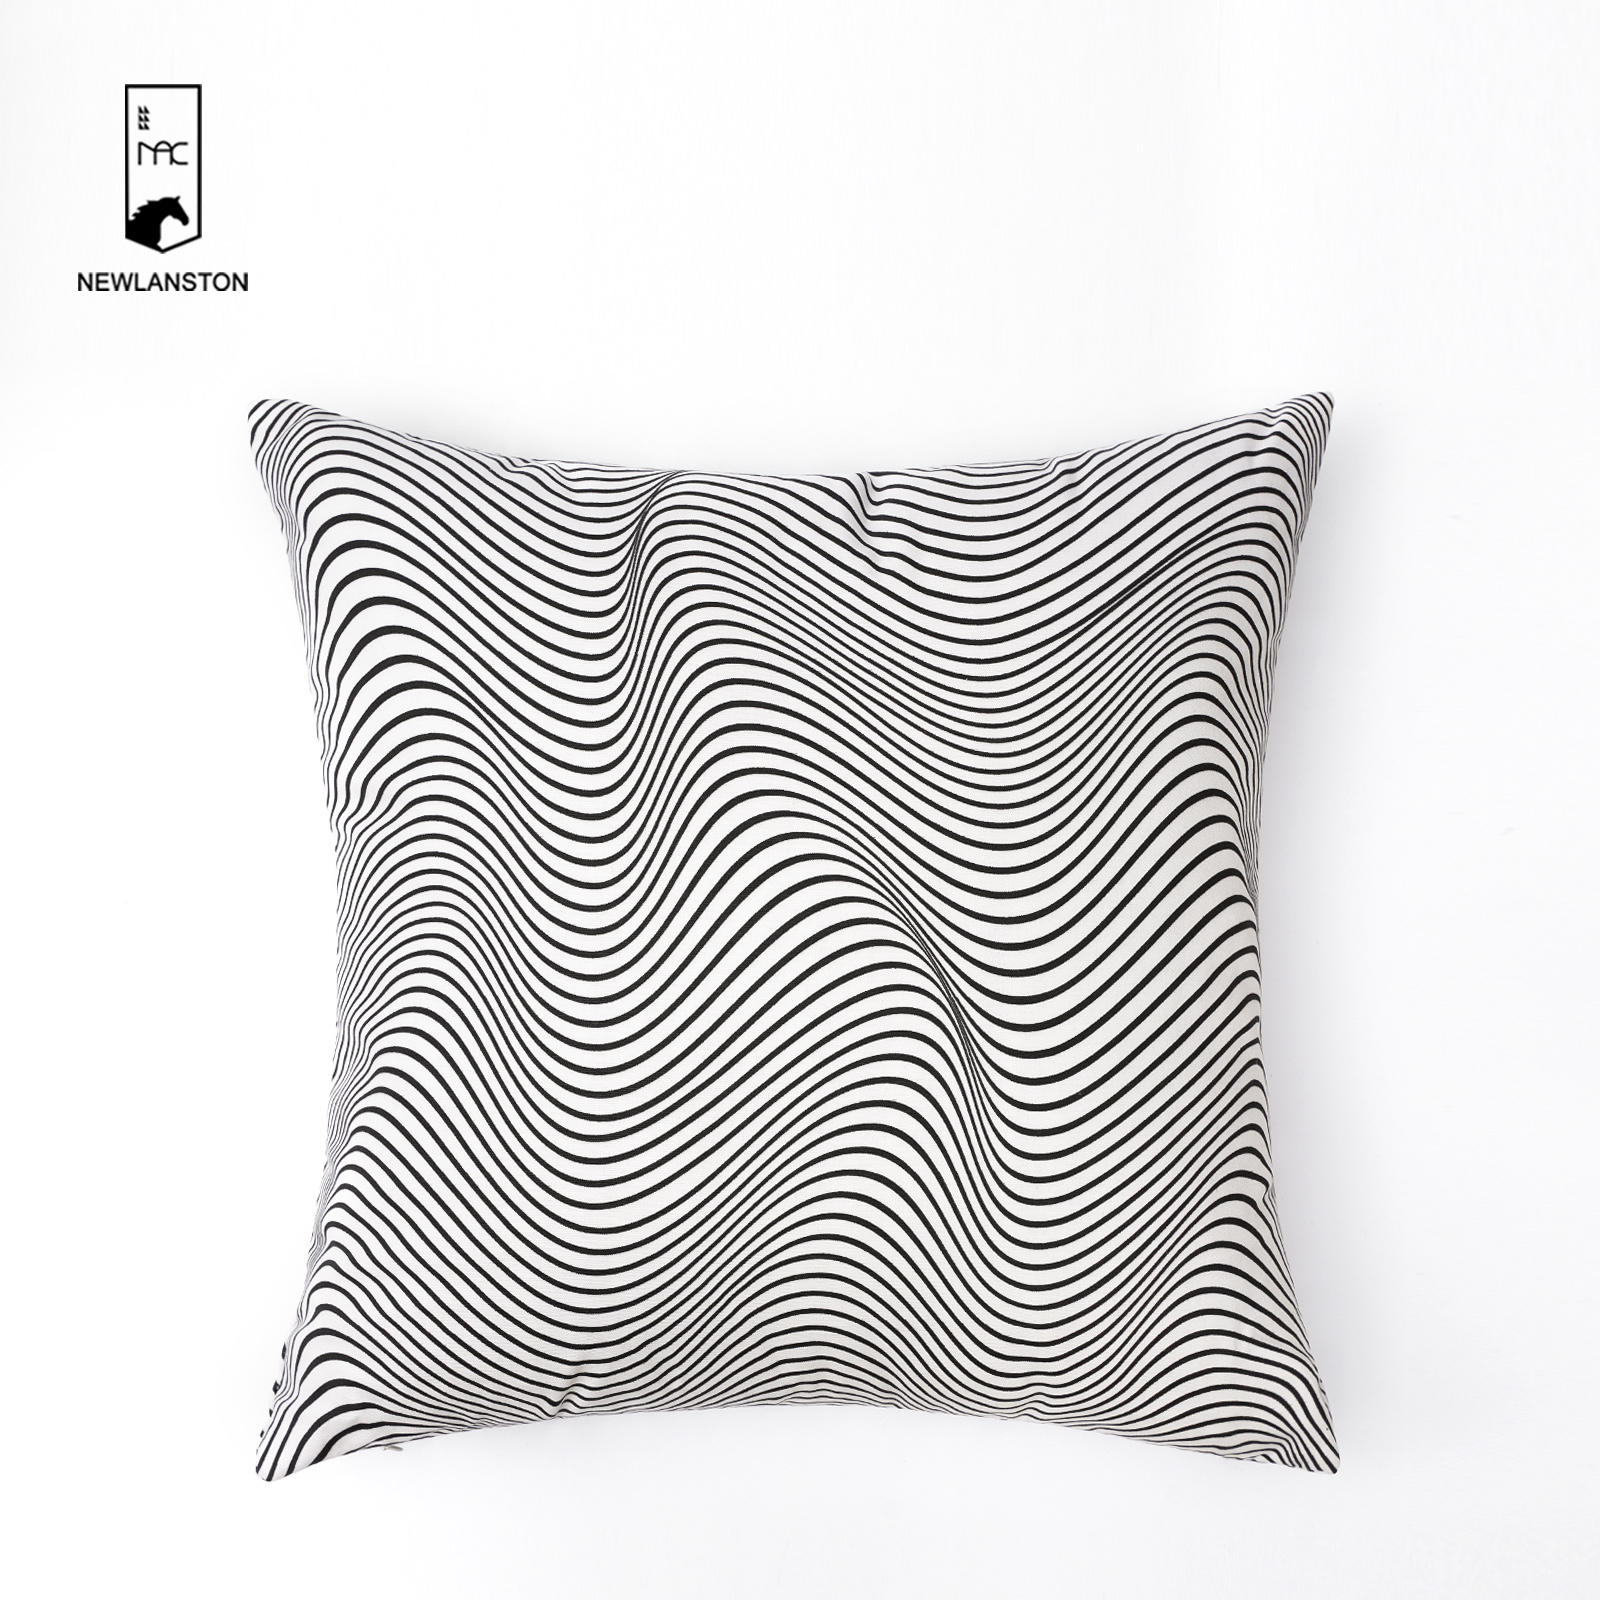 45x45 Digital printed recycled cotton Geometric style Cushion cover 